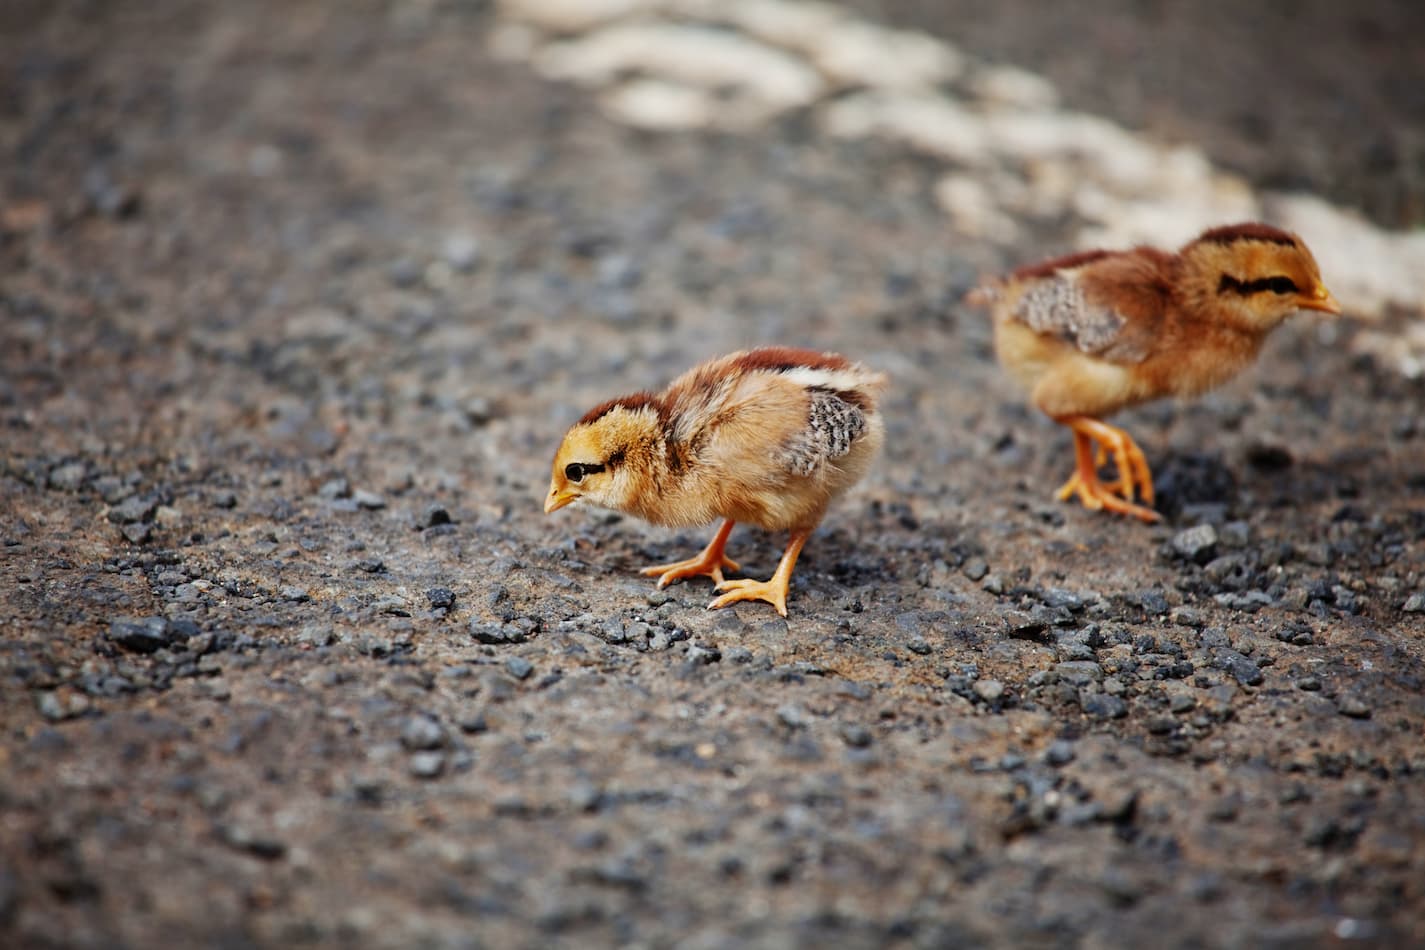 An image of chicks exploring on a road